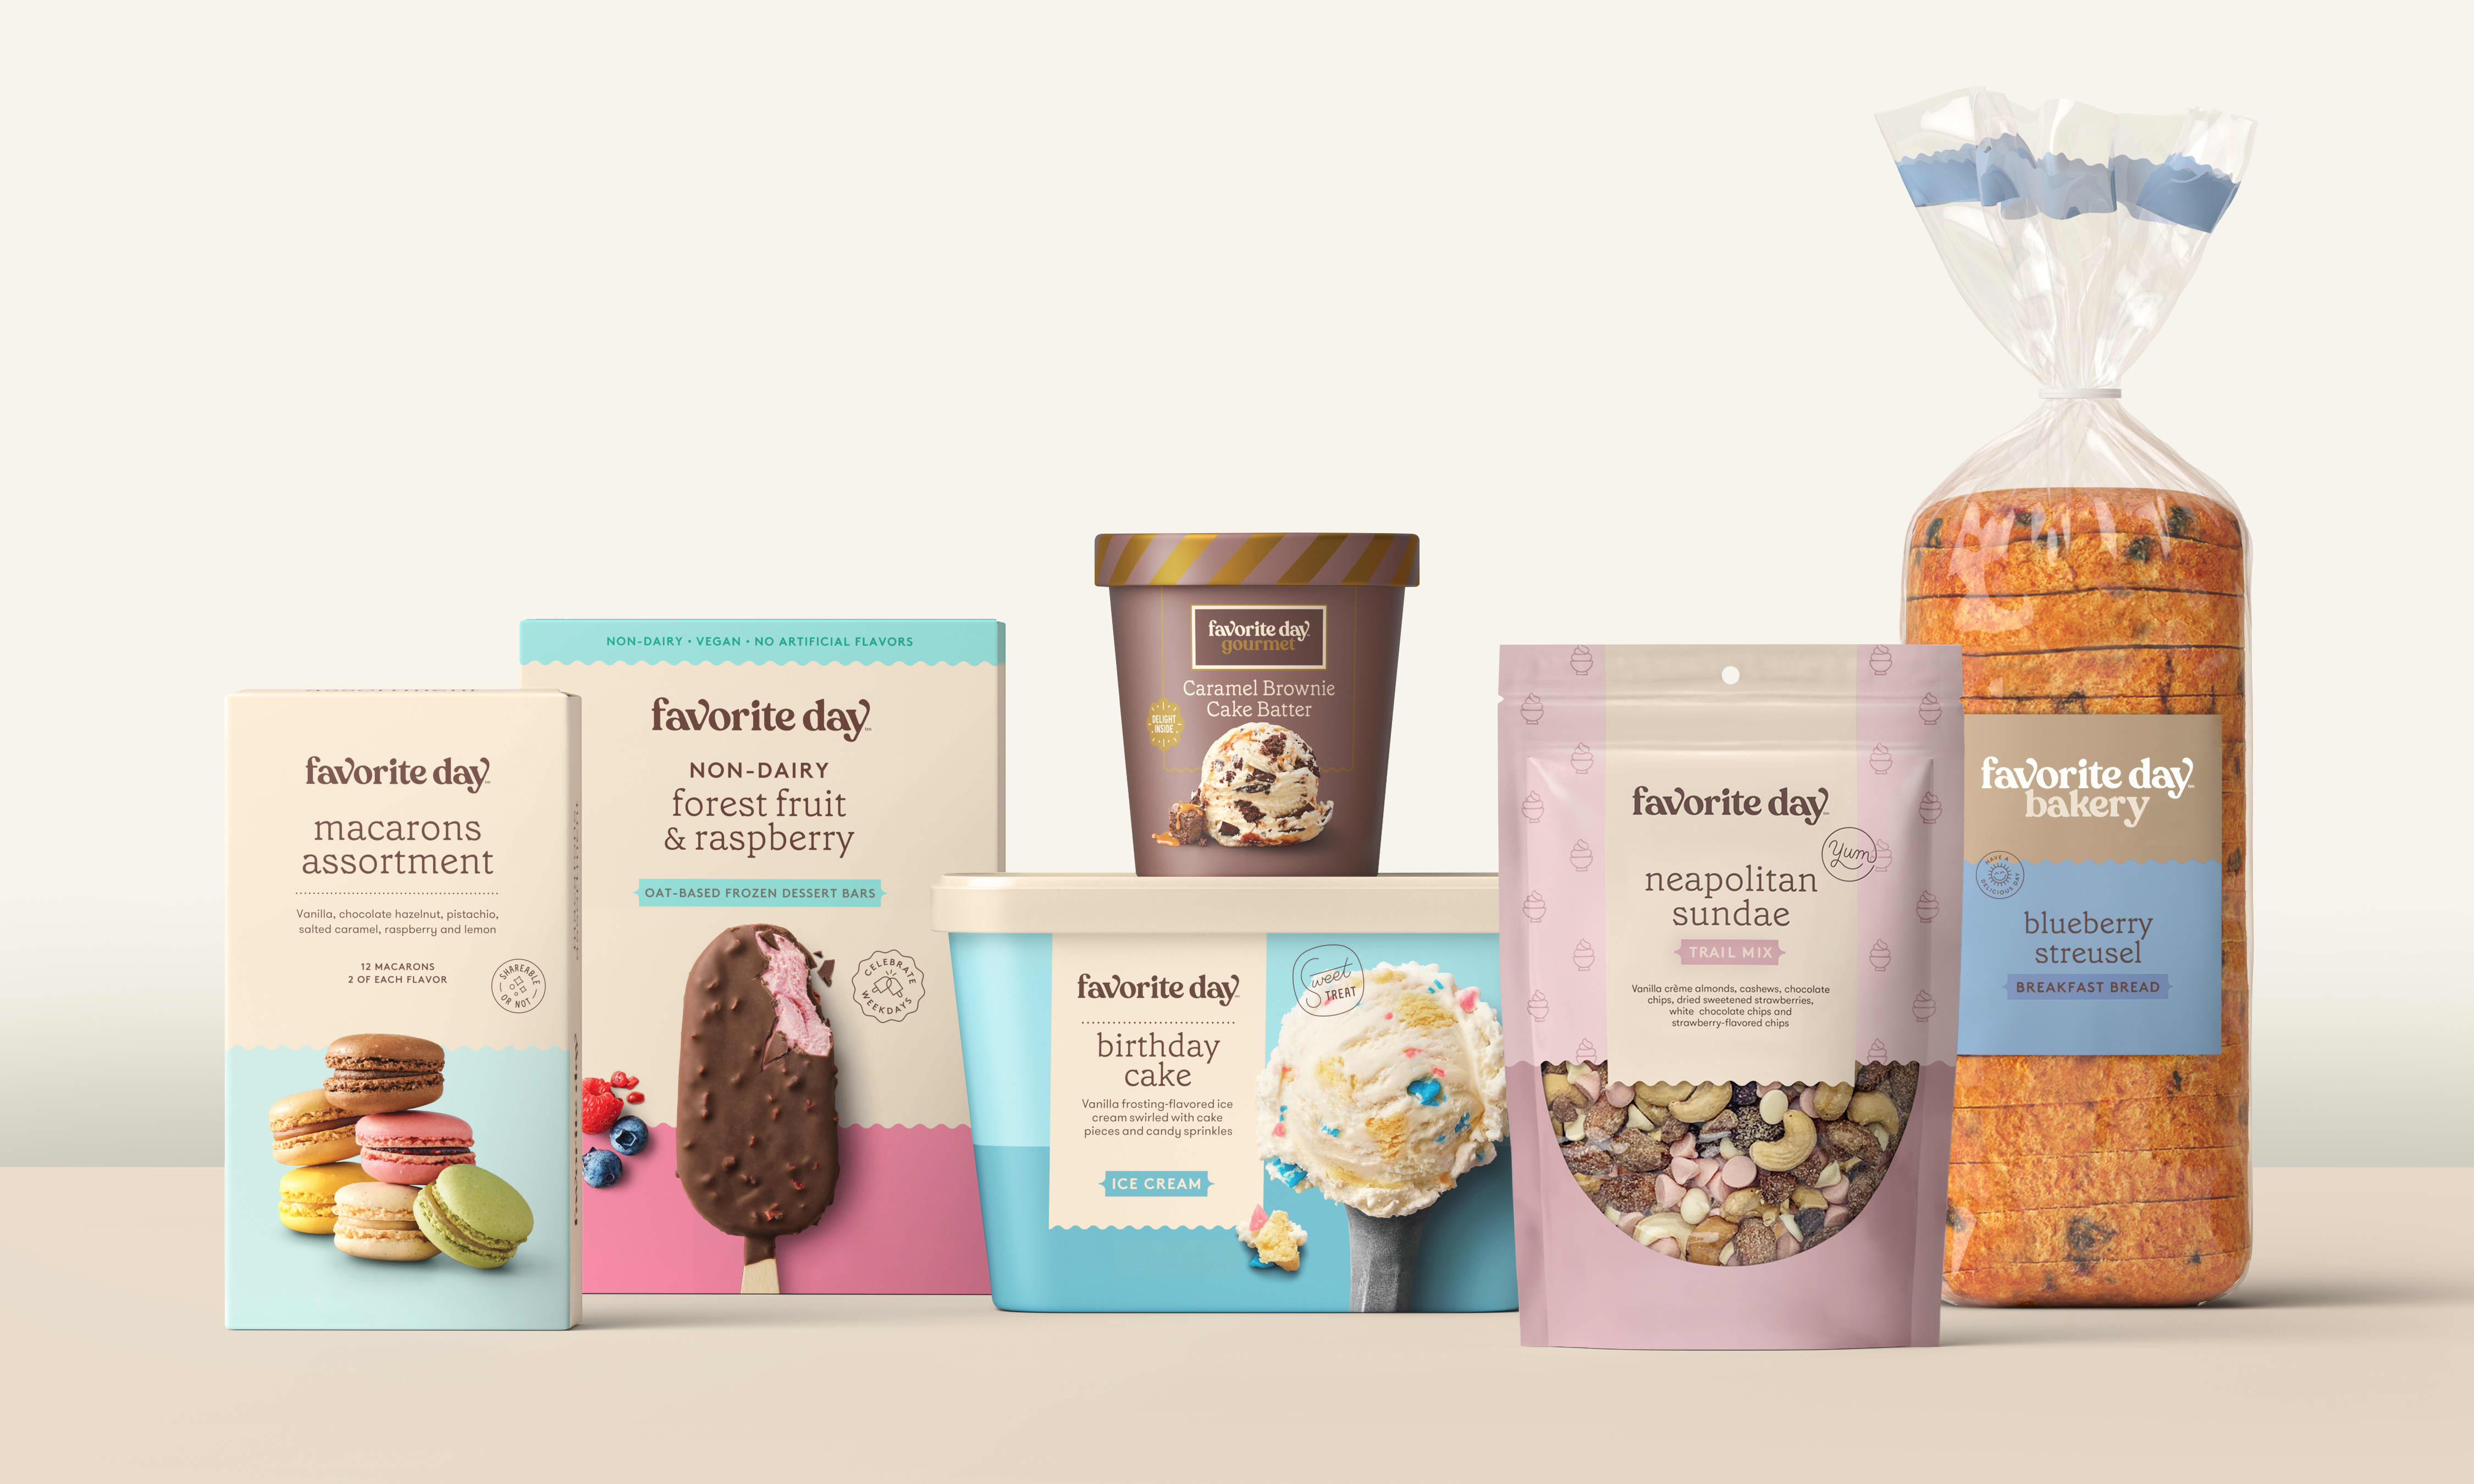 Target launches new grocery brand focused on snacks, indulgences